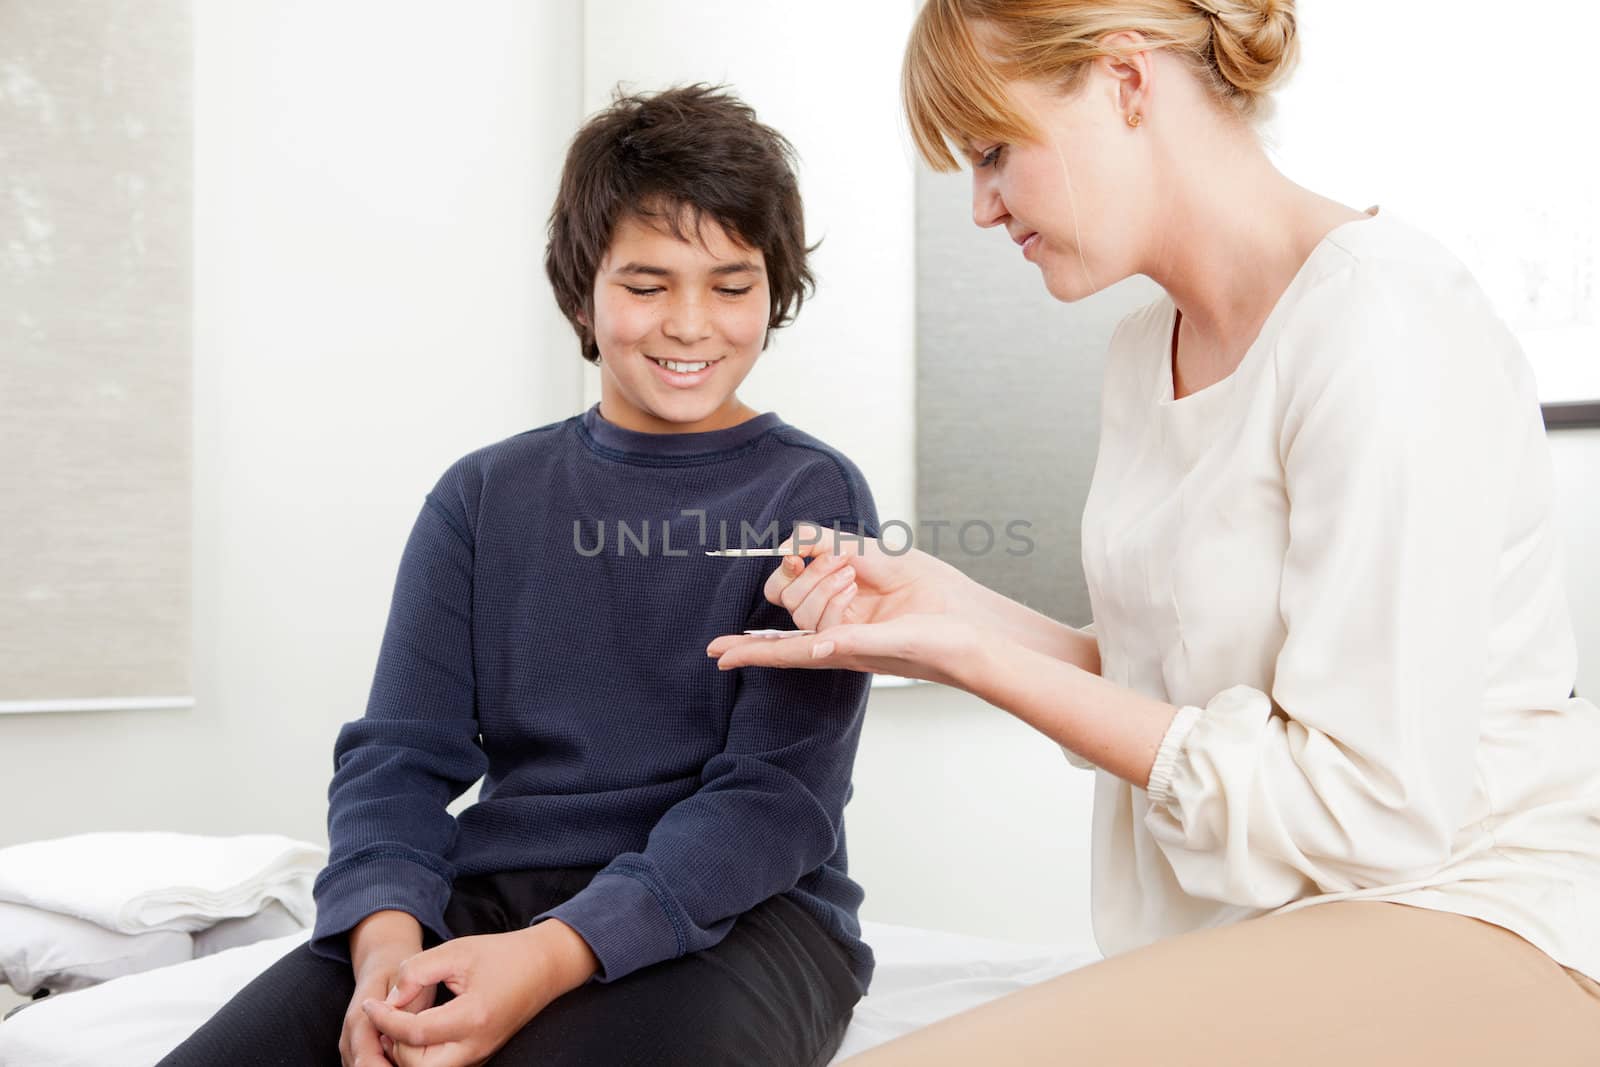 Professional acupuncturist showing needles to young patient